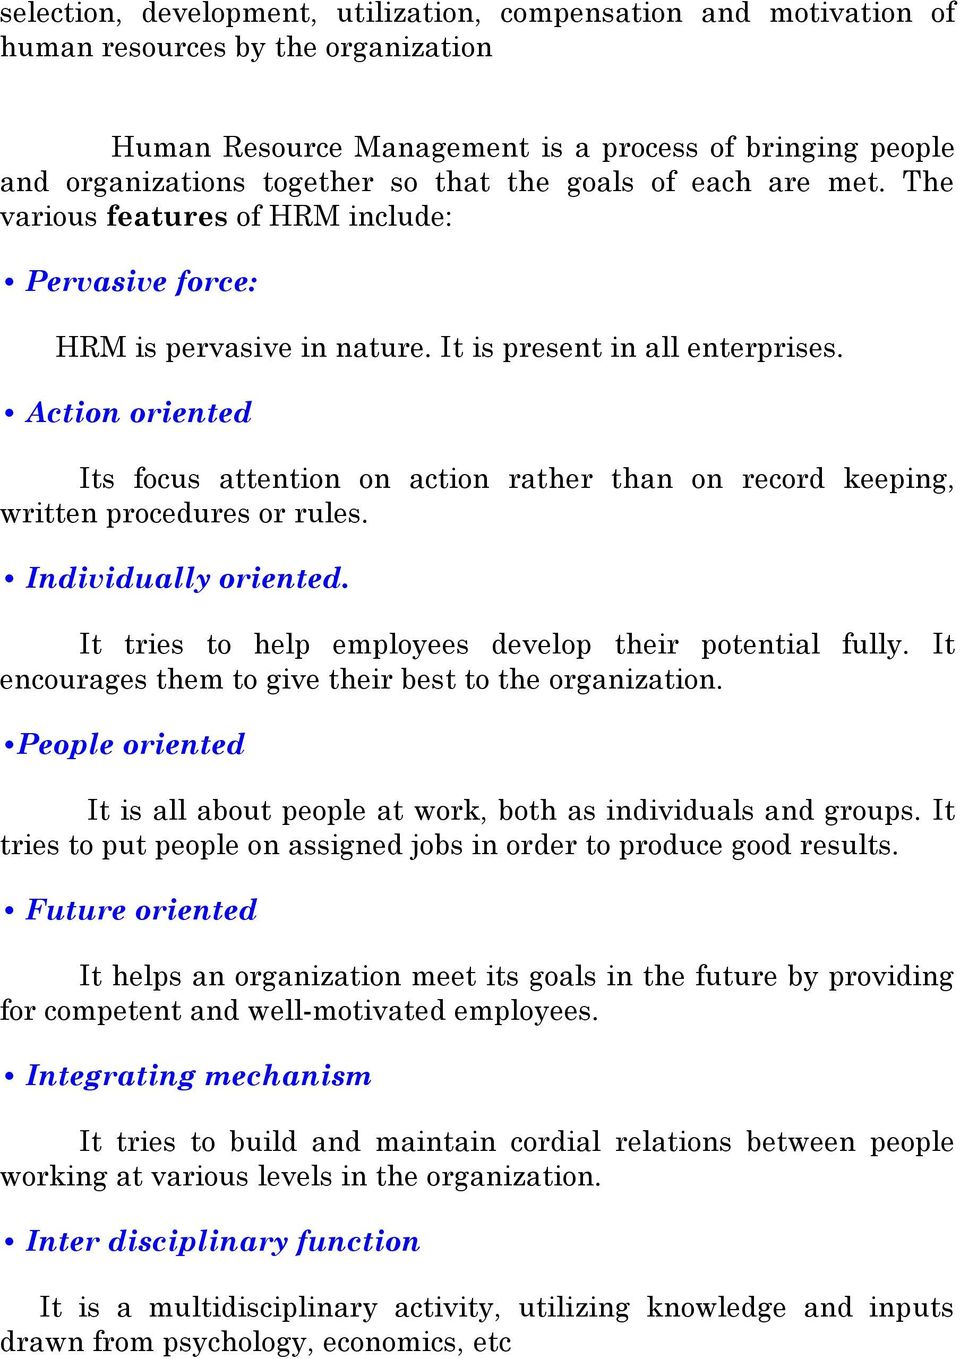 features of human resource management